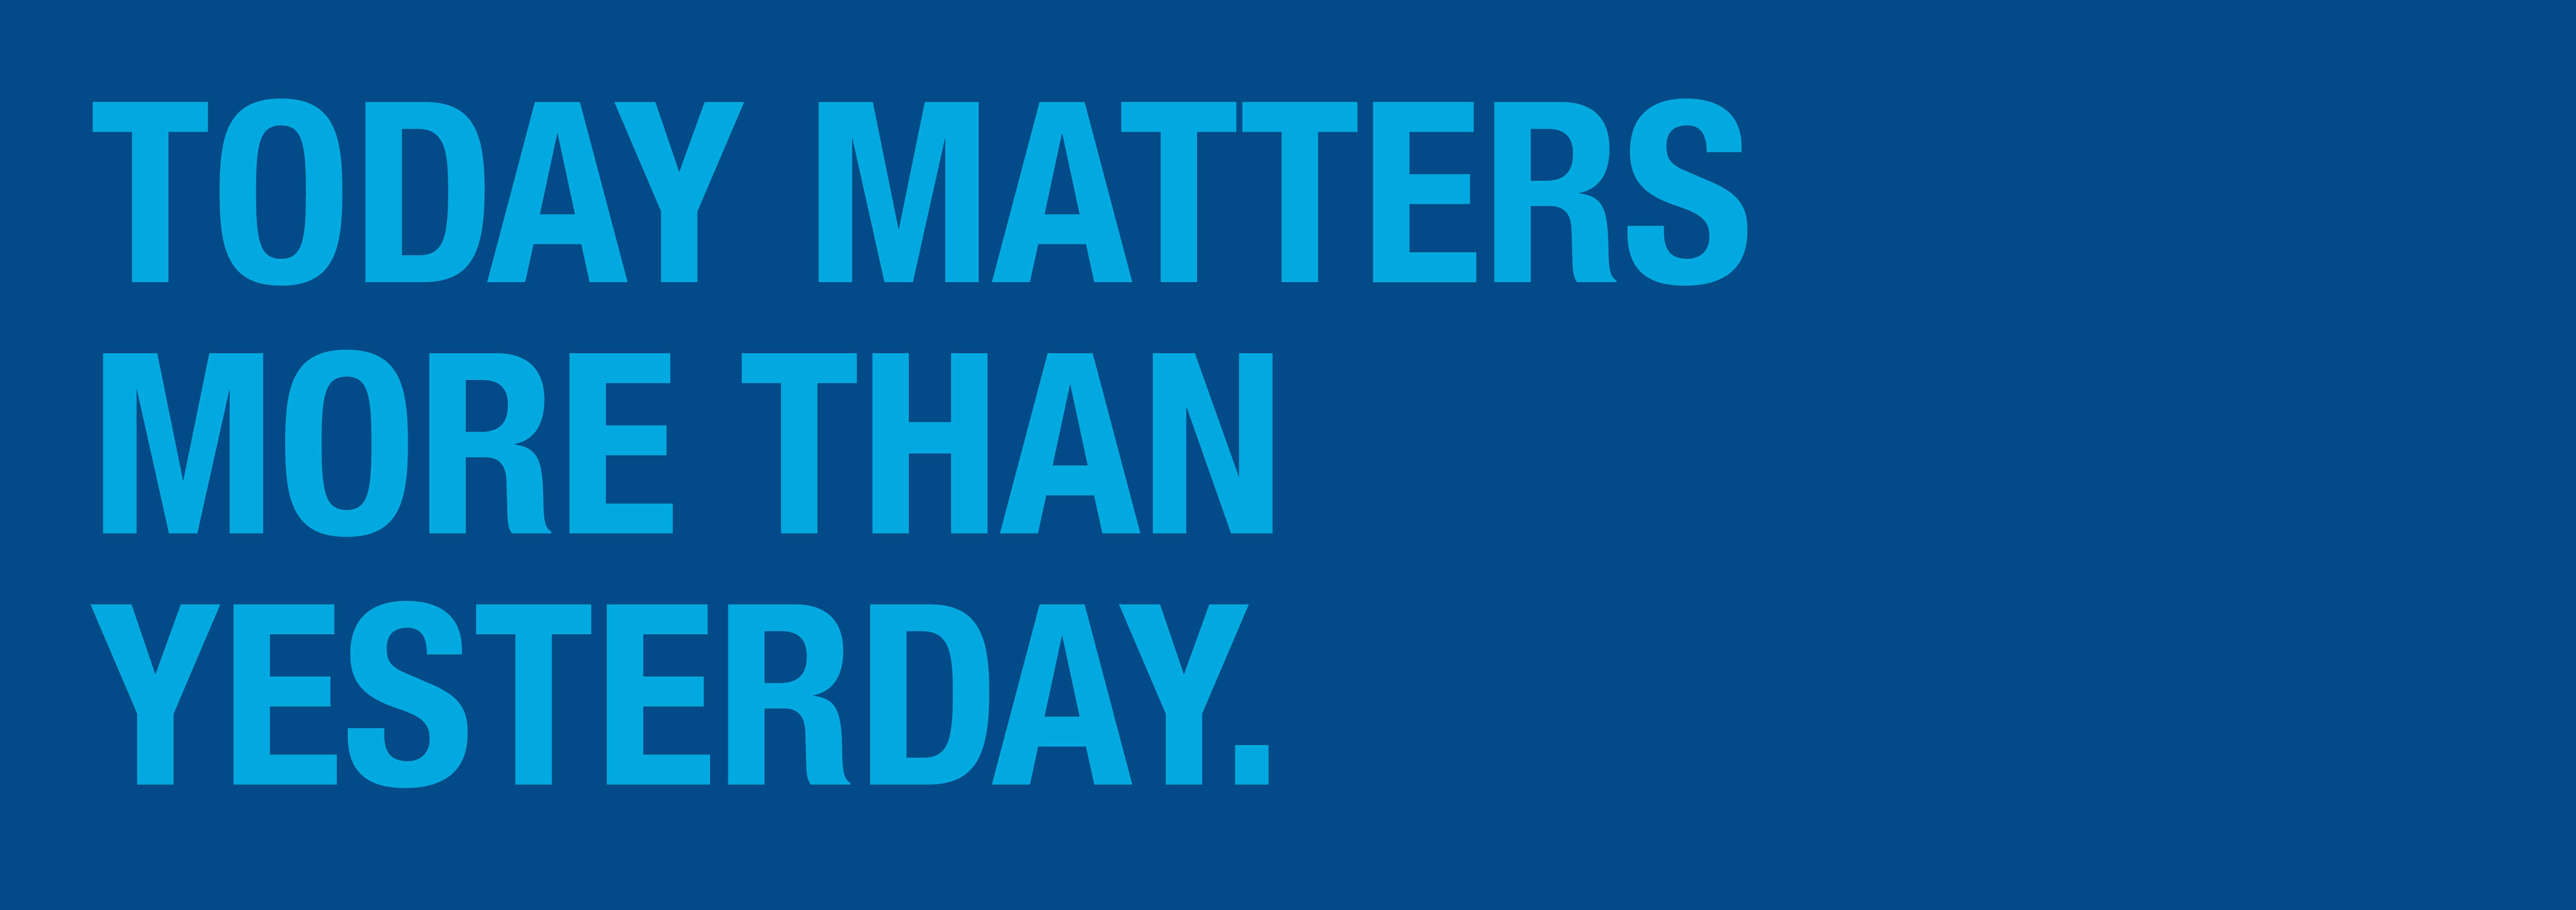 Today Matters More than Yesterday